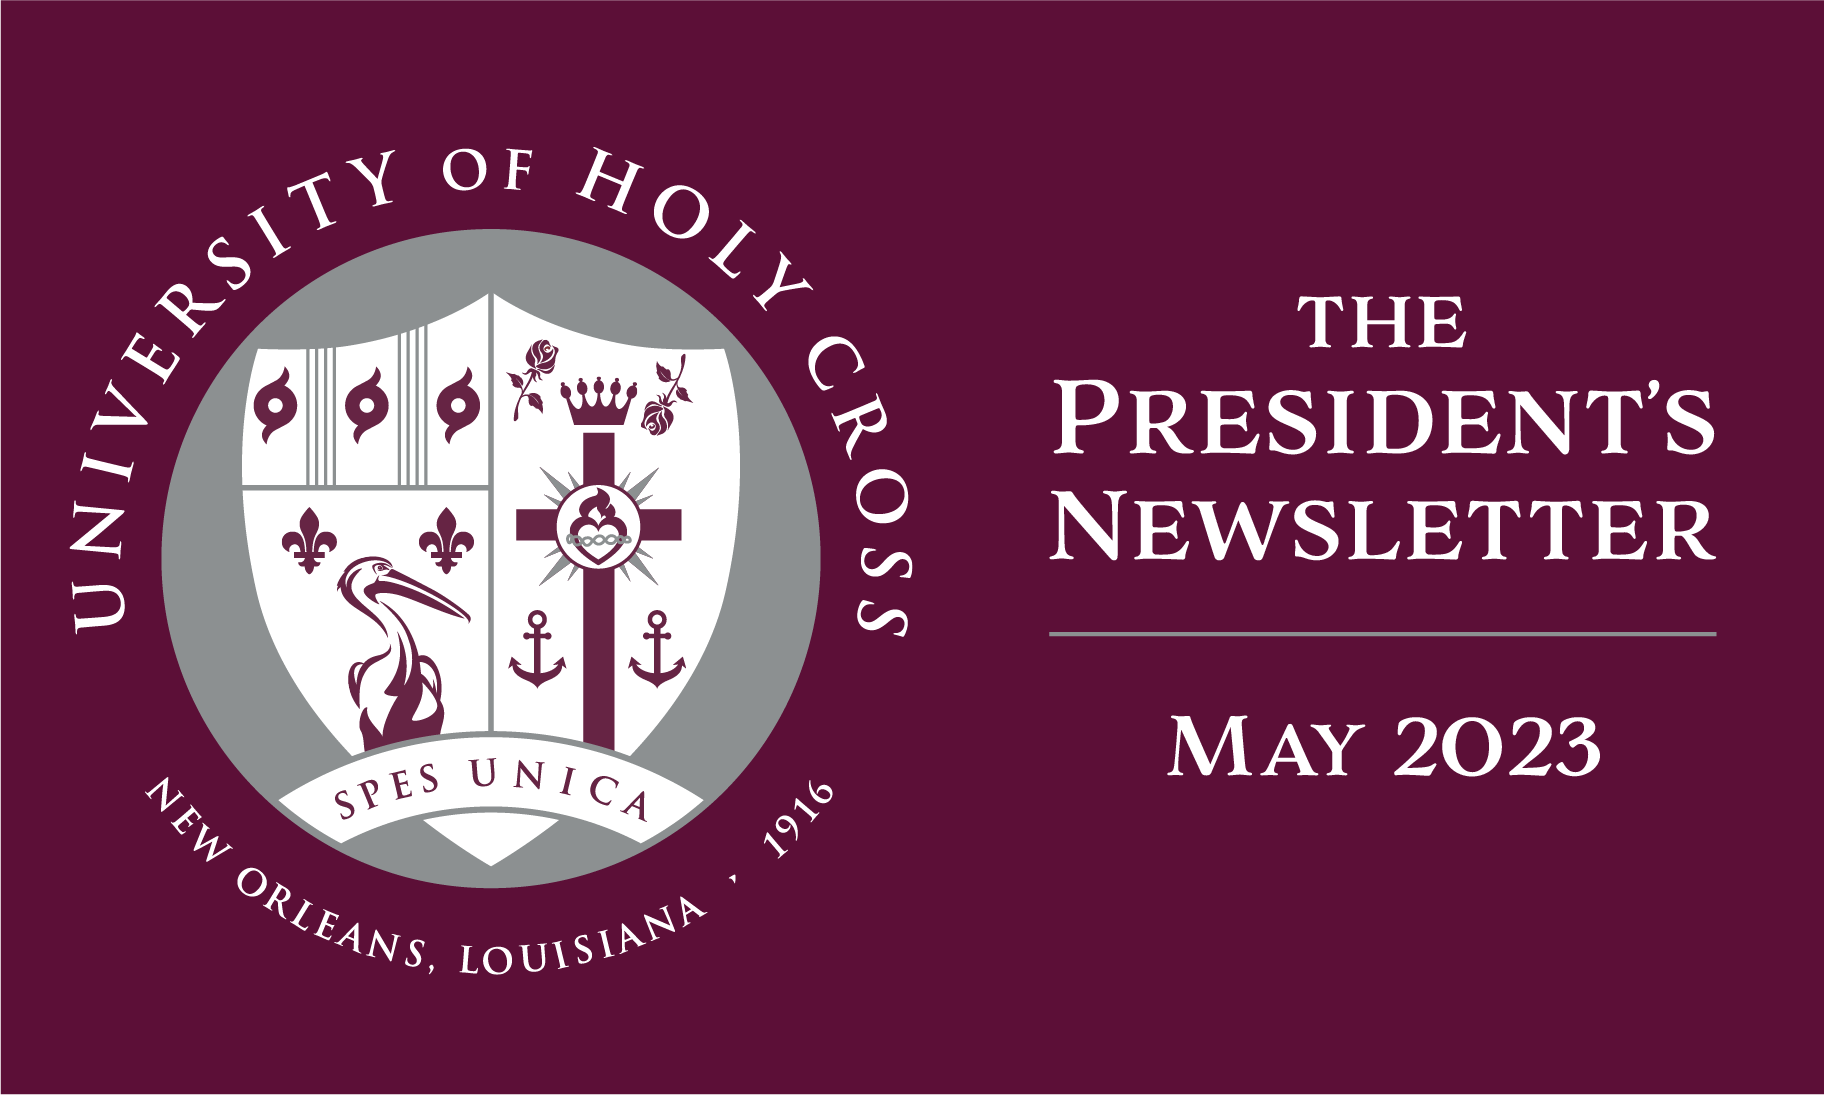 The President's Newsletter - May 2023